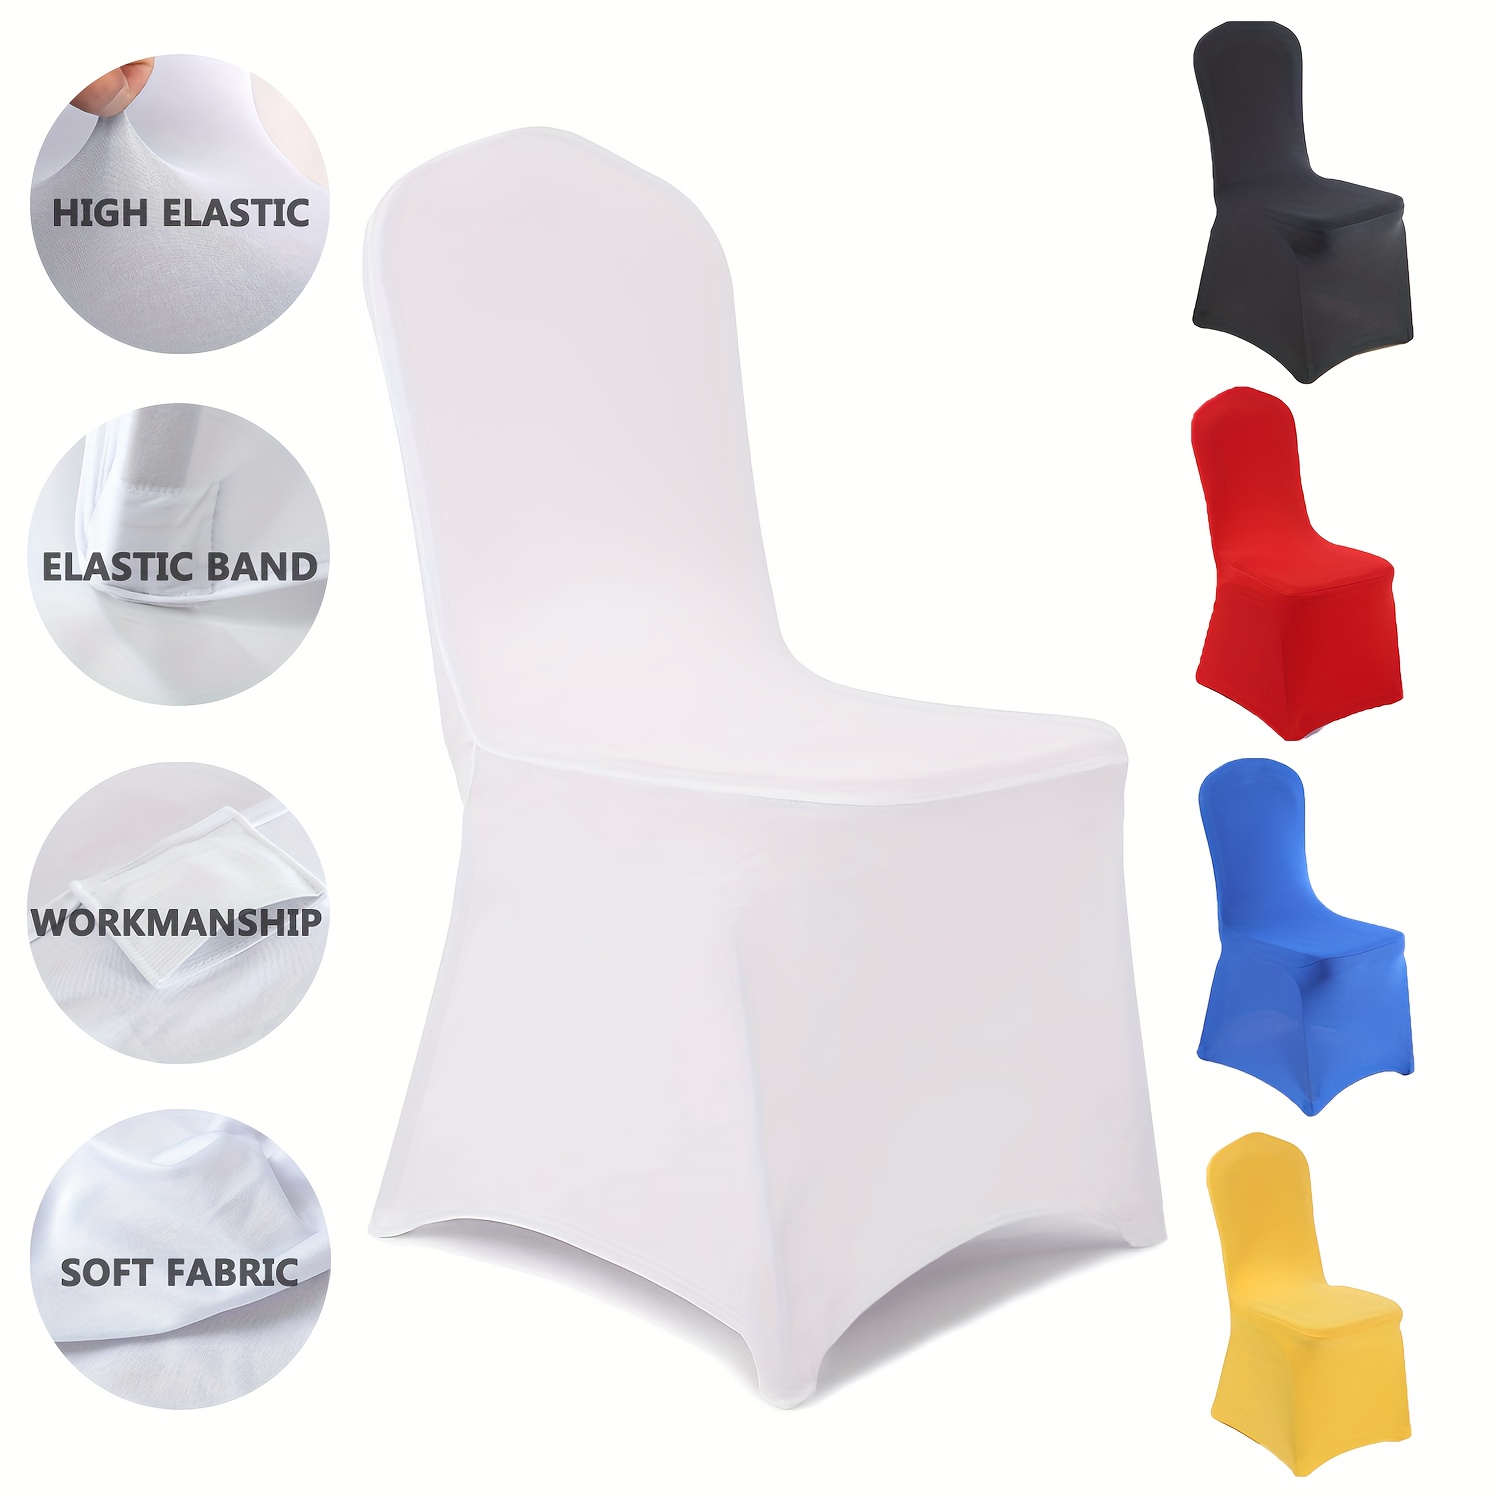  AZON Black 10PCS Stretch Folding Spandex Chair Covers for  Banquets, Weddings, Party and Celebration : Home & Kitchen